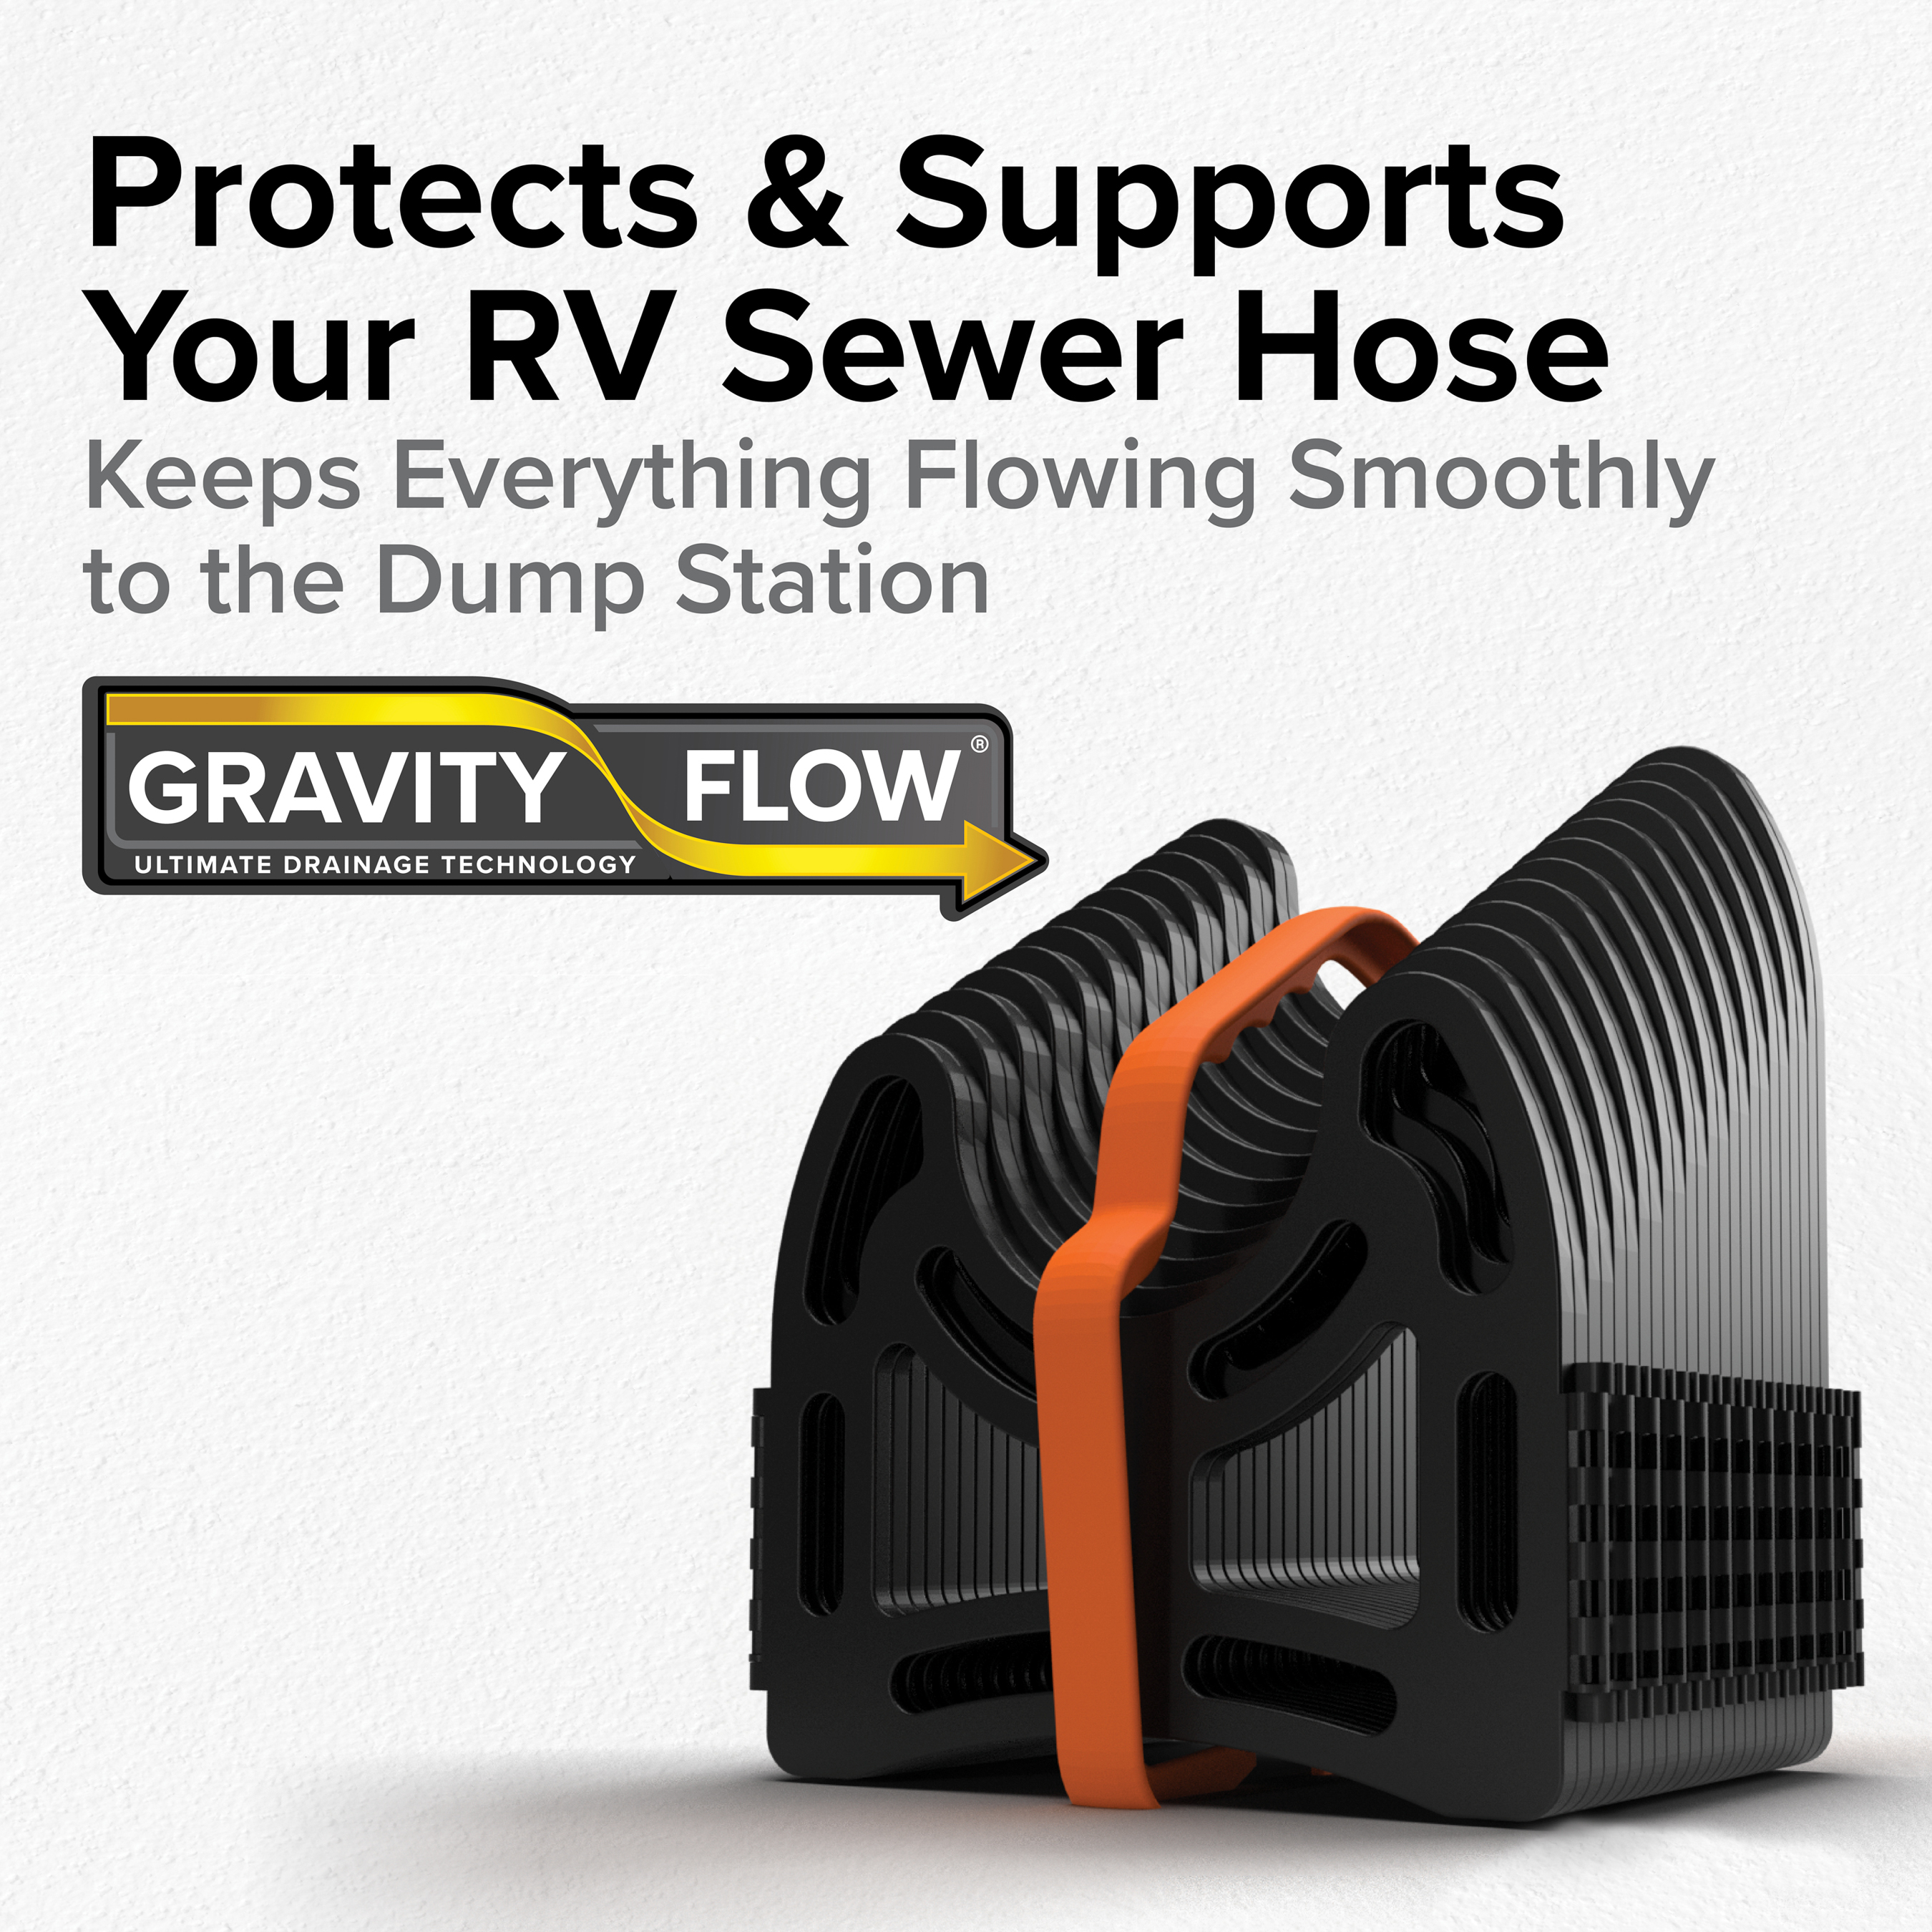 Camco Sidewinder RV Sewer Hose Support - Black, Heavy Duty Plastic, 15-Foot (43041) - image 3 of 7